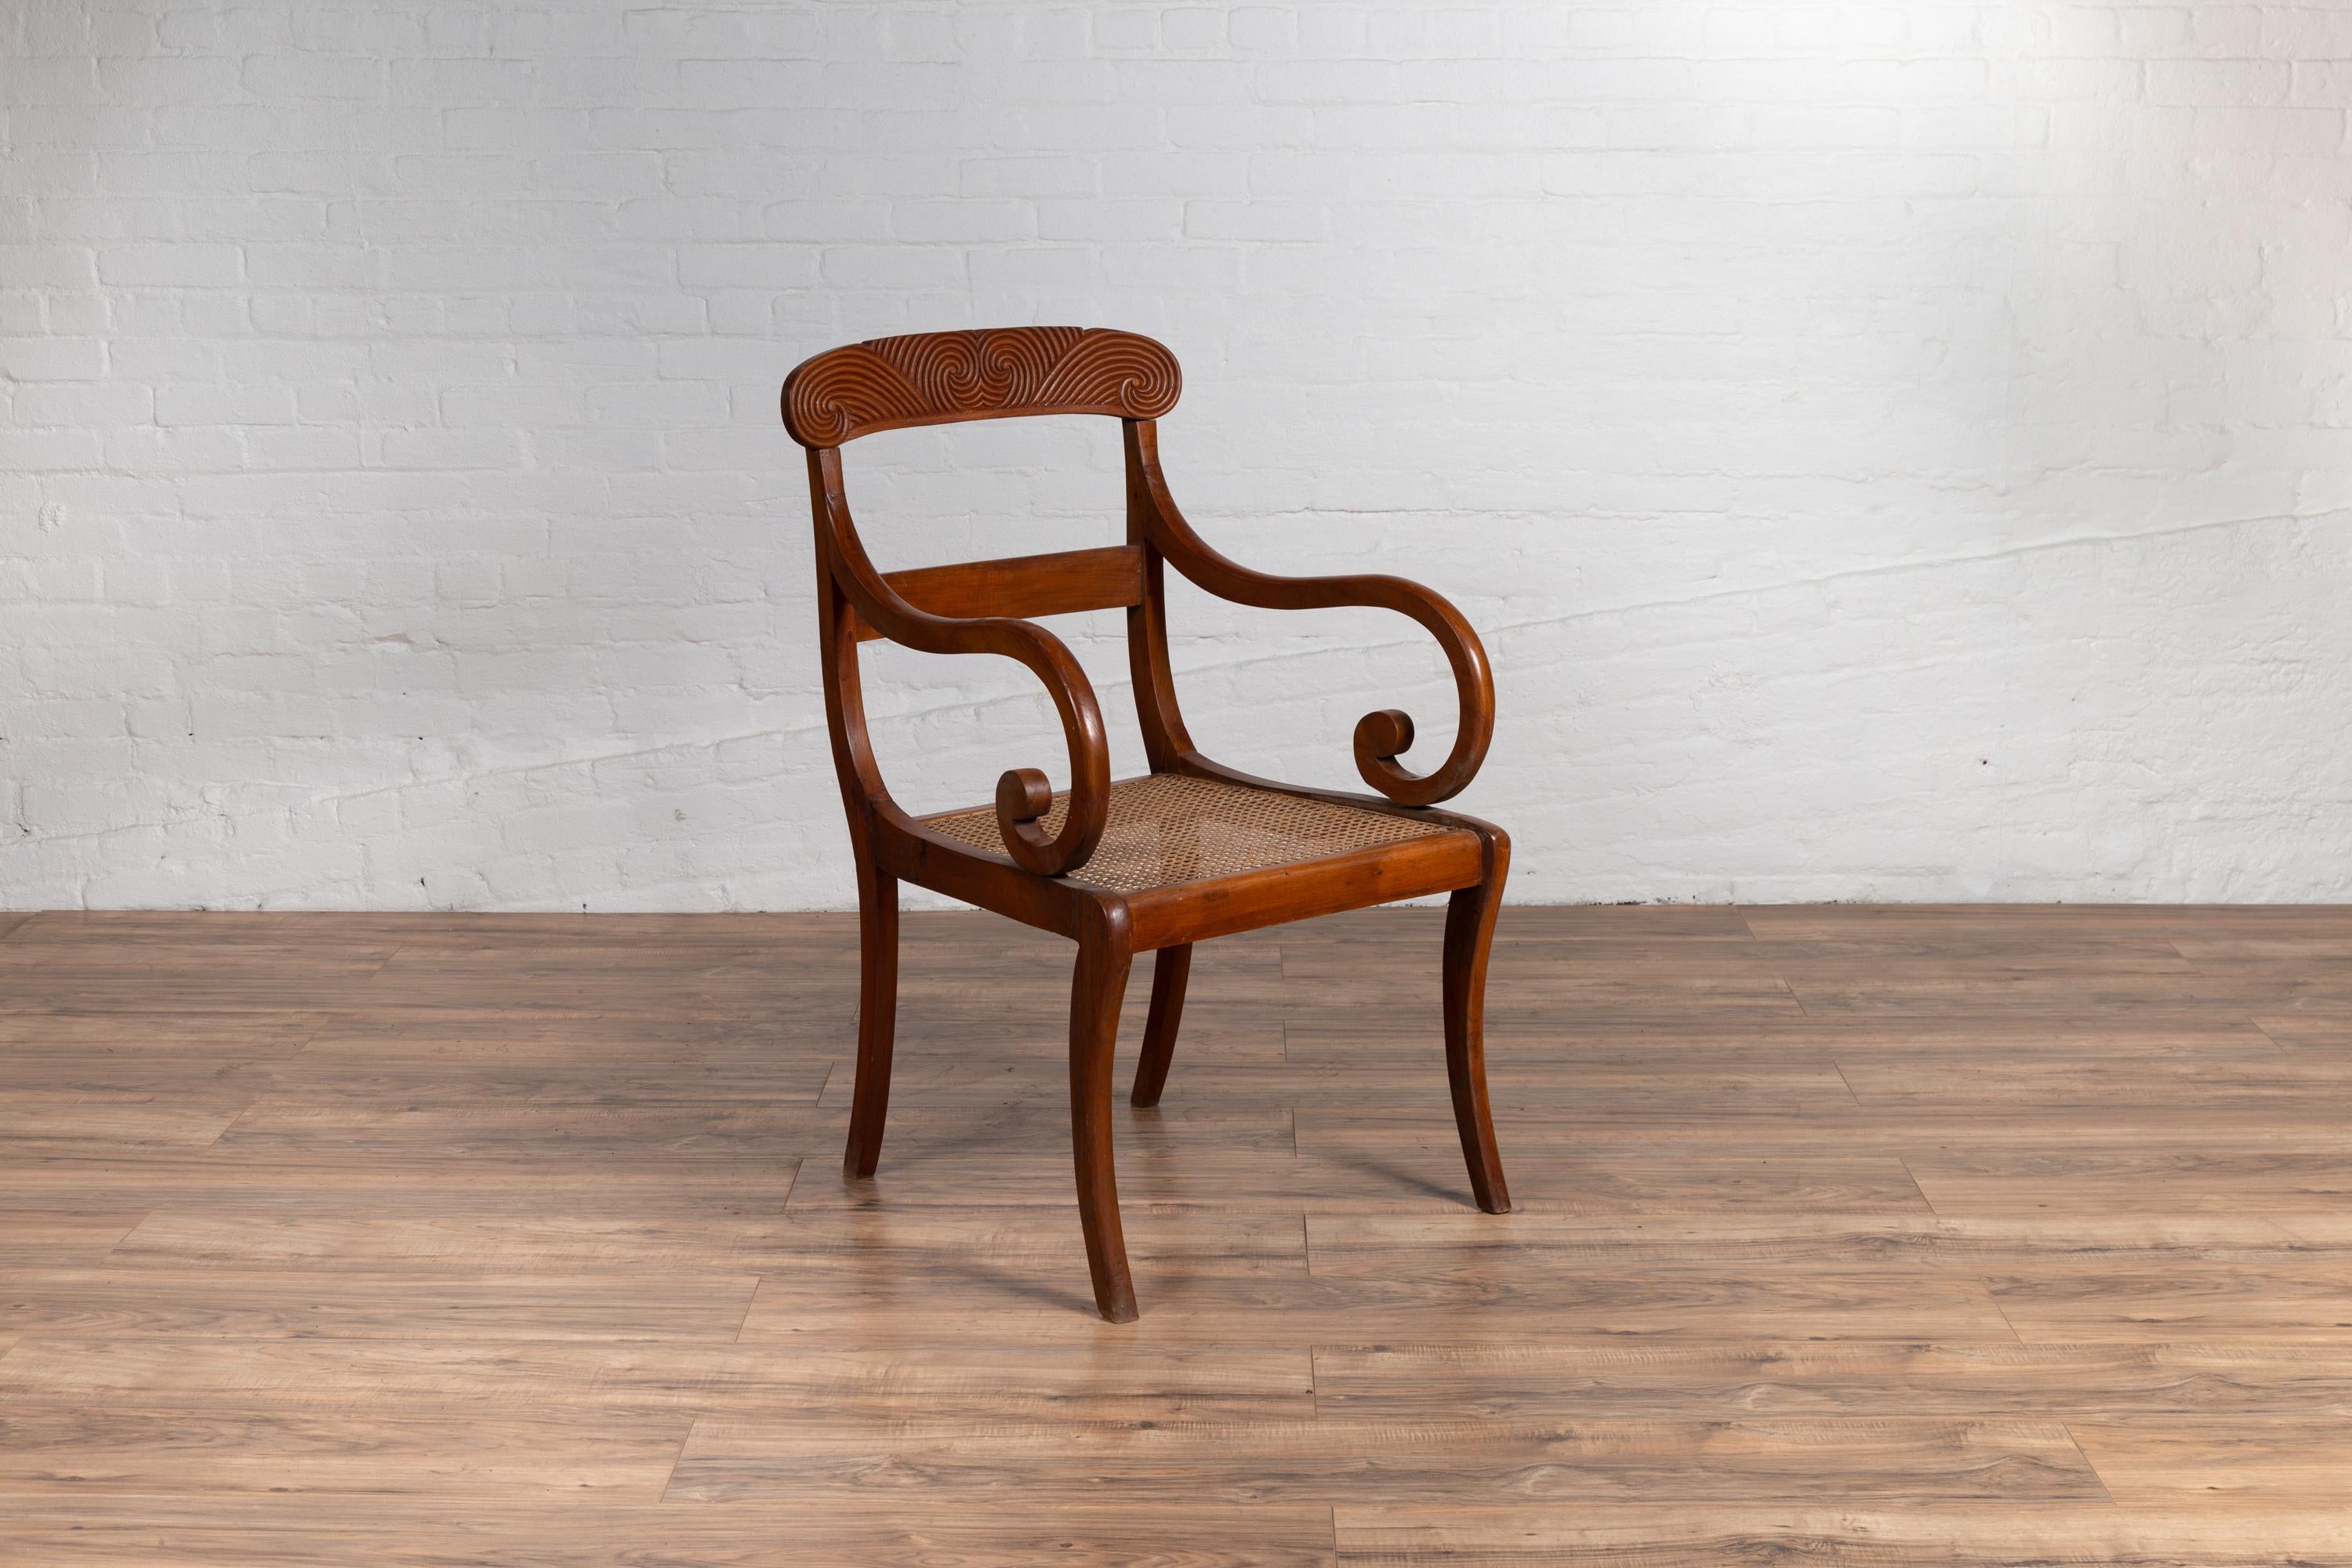 vintage wooden chairs with arms